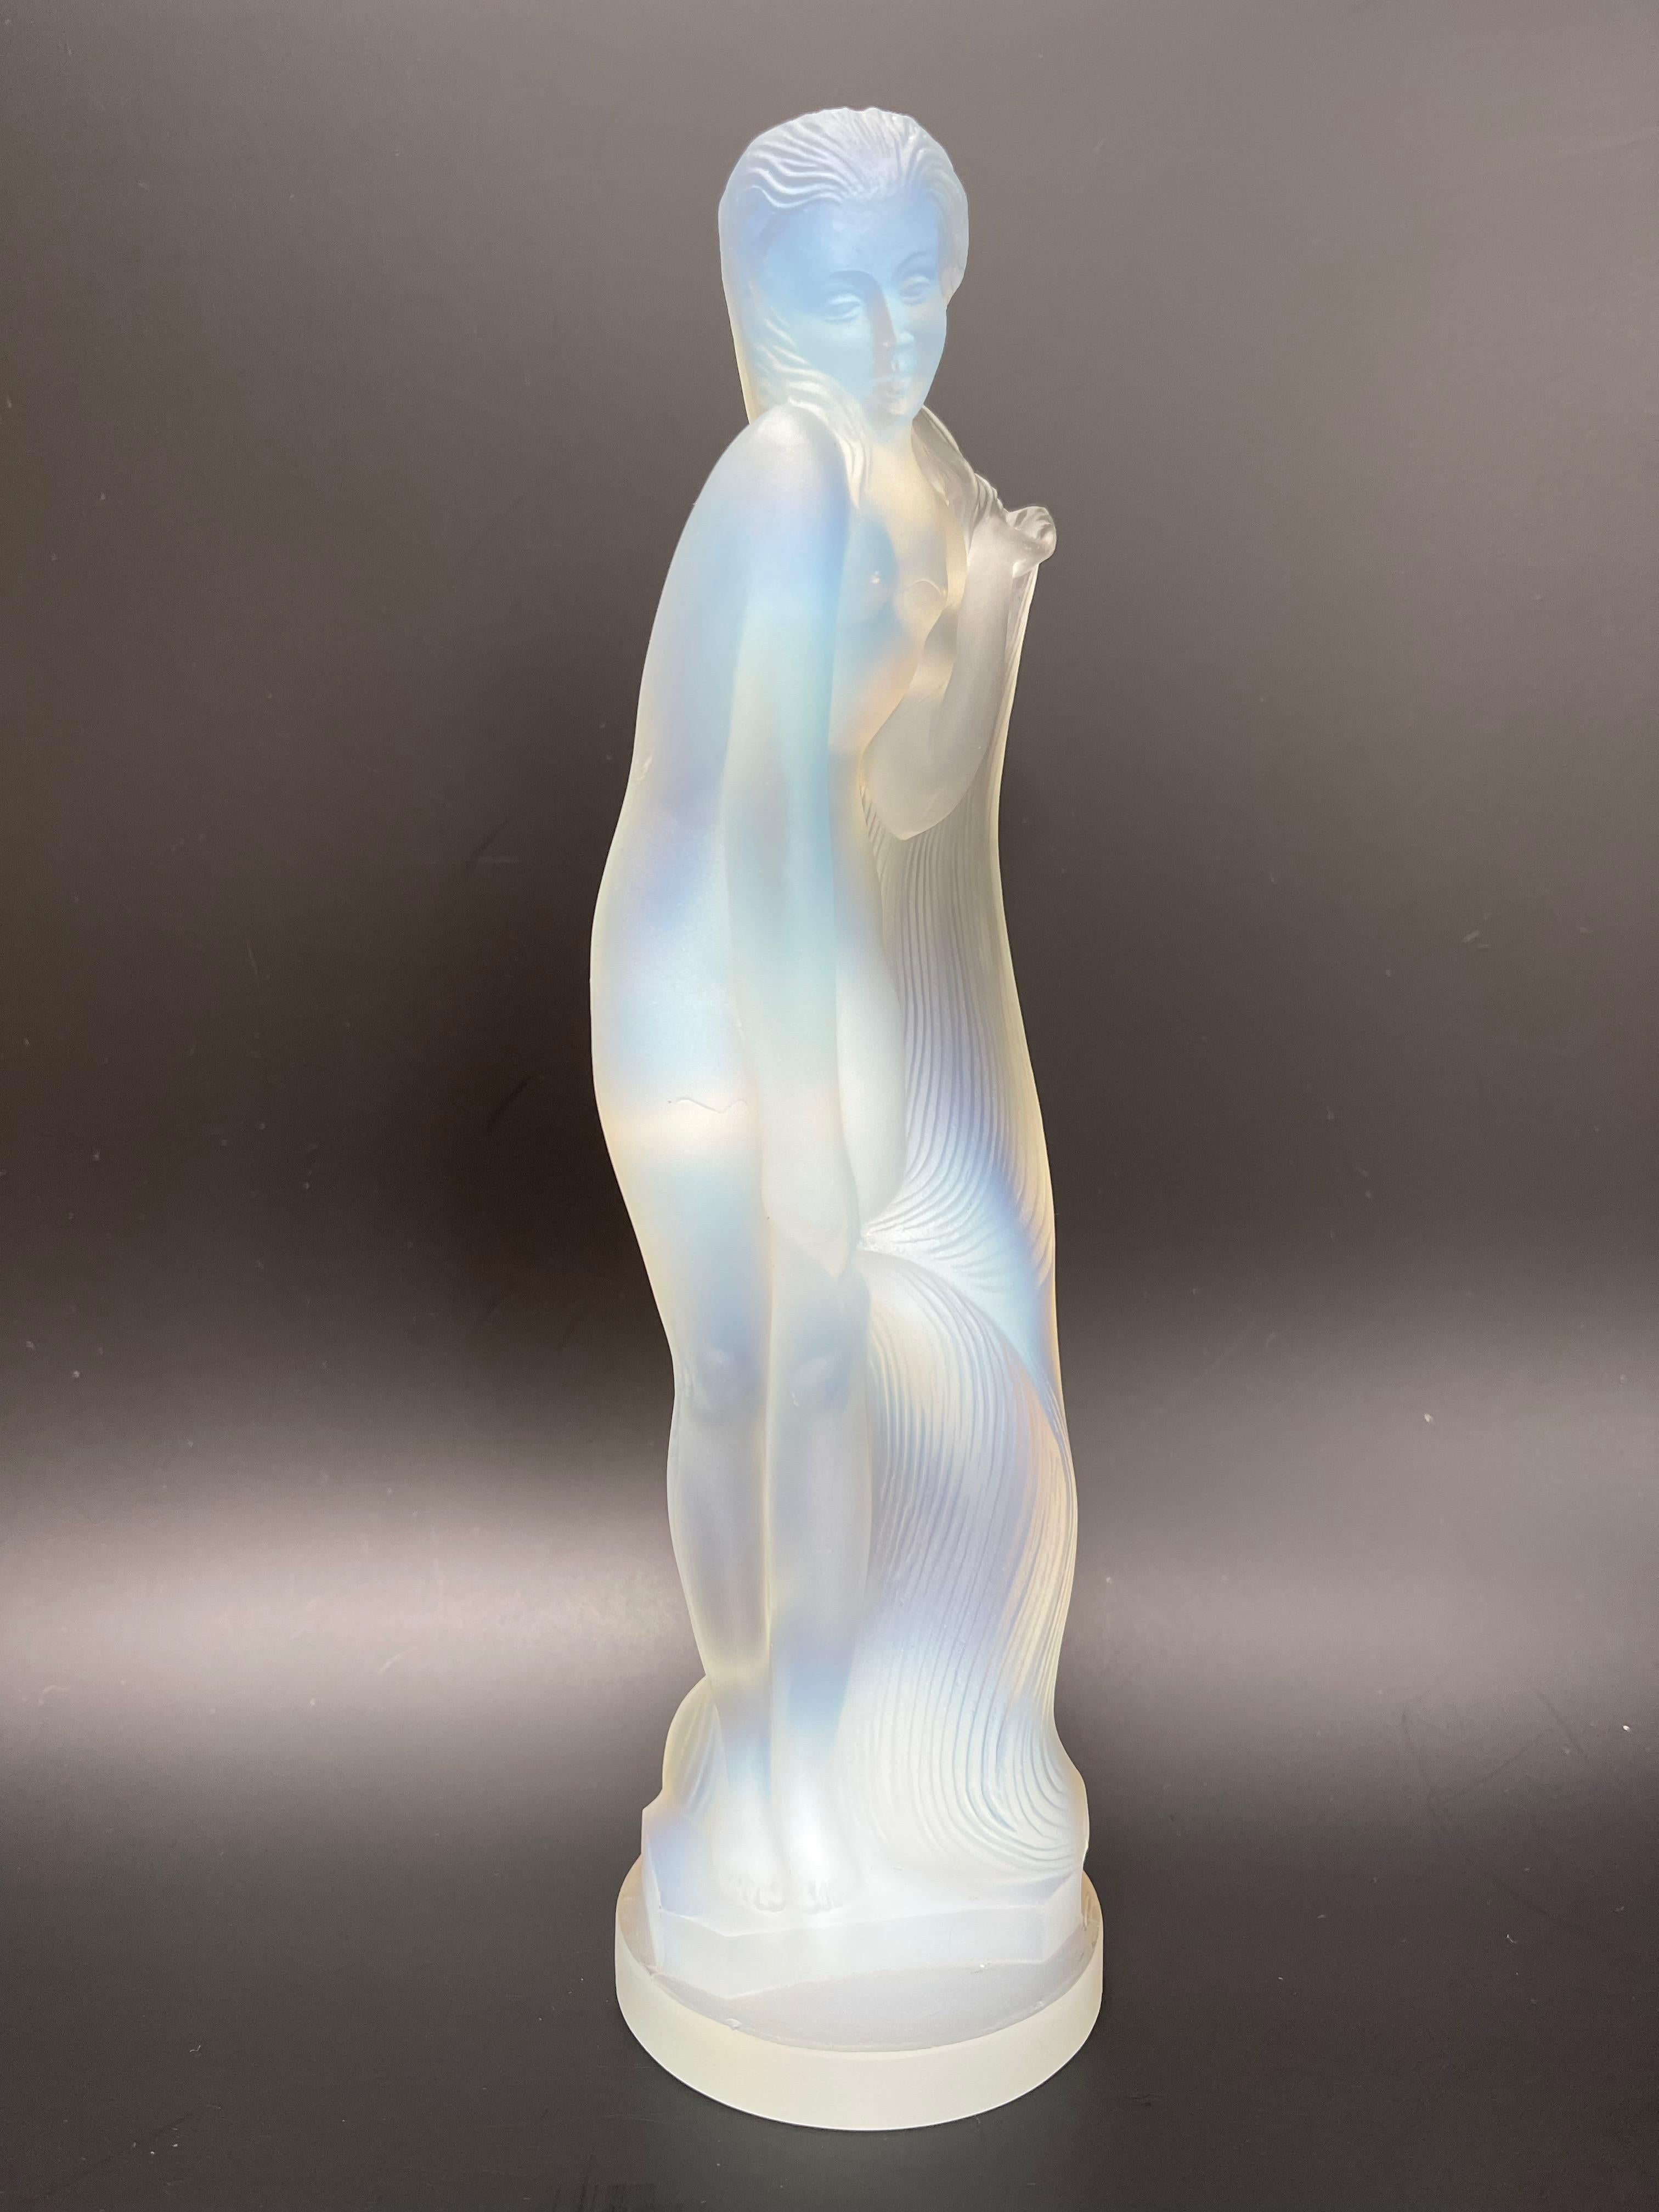 Naked woman with long hair, creation of Mrs. Lucille Sevin in 1932.
Signed Etling France
In perfect condition

Measures: Height: 22.5cm
Diameter: 6.2cm
Weight: 700 Grams

Lucille Sévin is a French sculptor, active from 1920 to 1940. Lucille